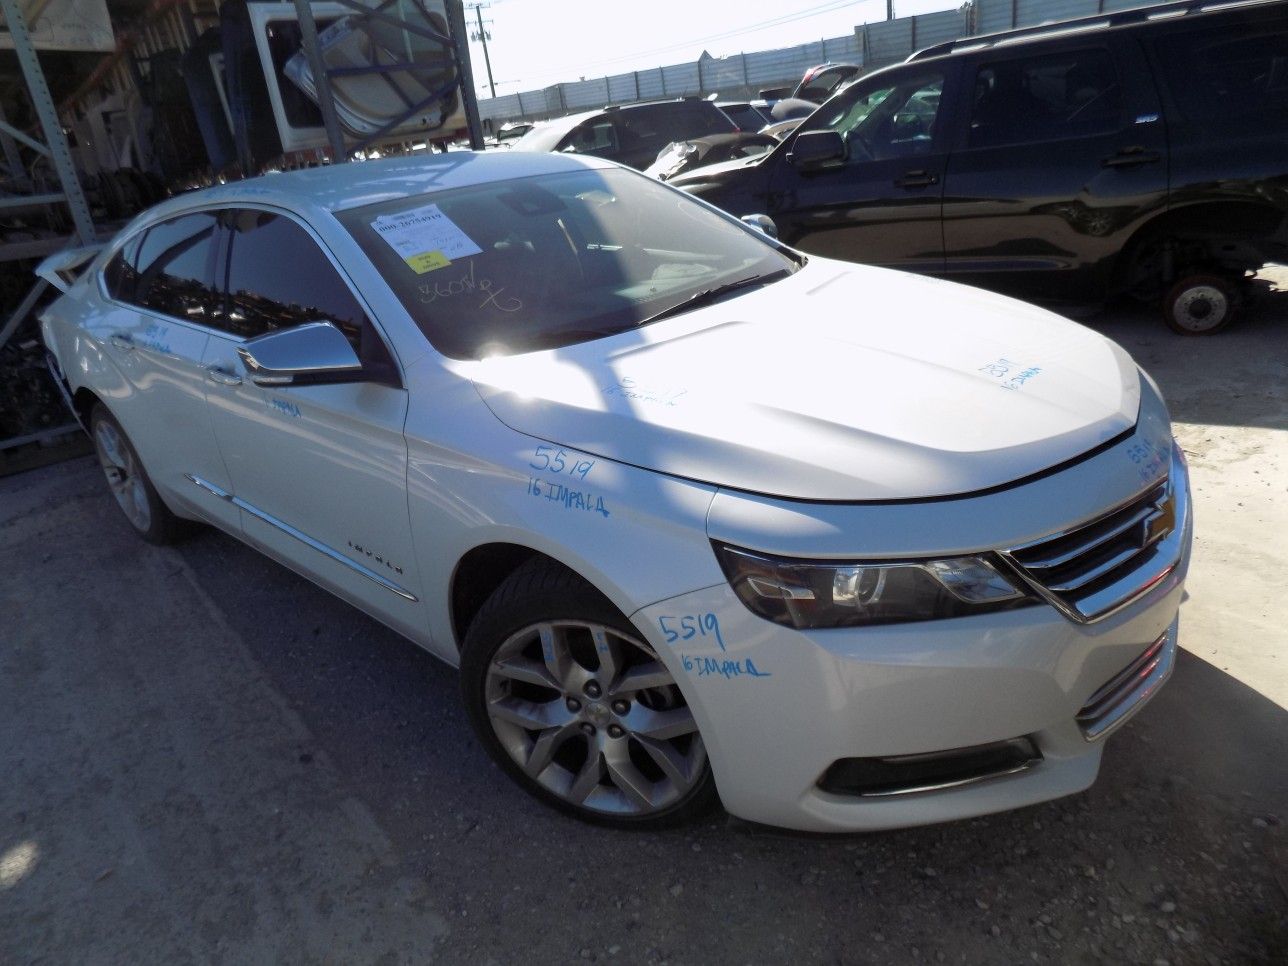 2016 Chevy Impala 3.6l (Parting Out) STOCK # 5519